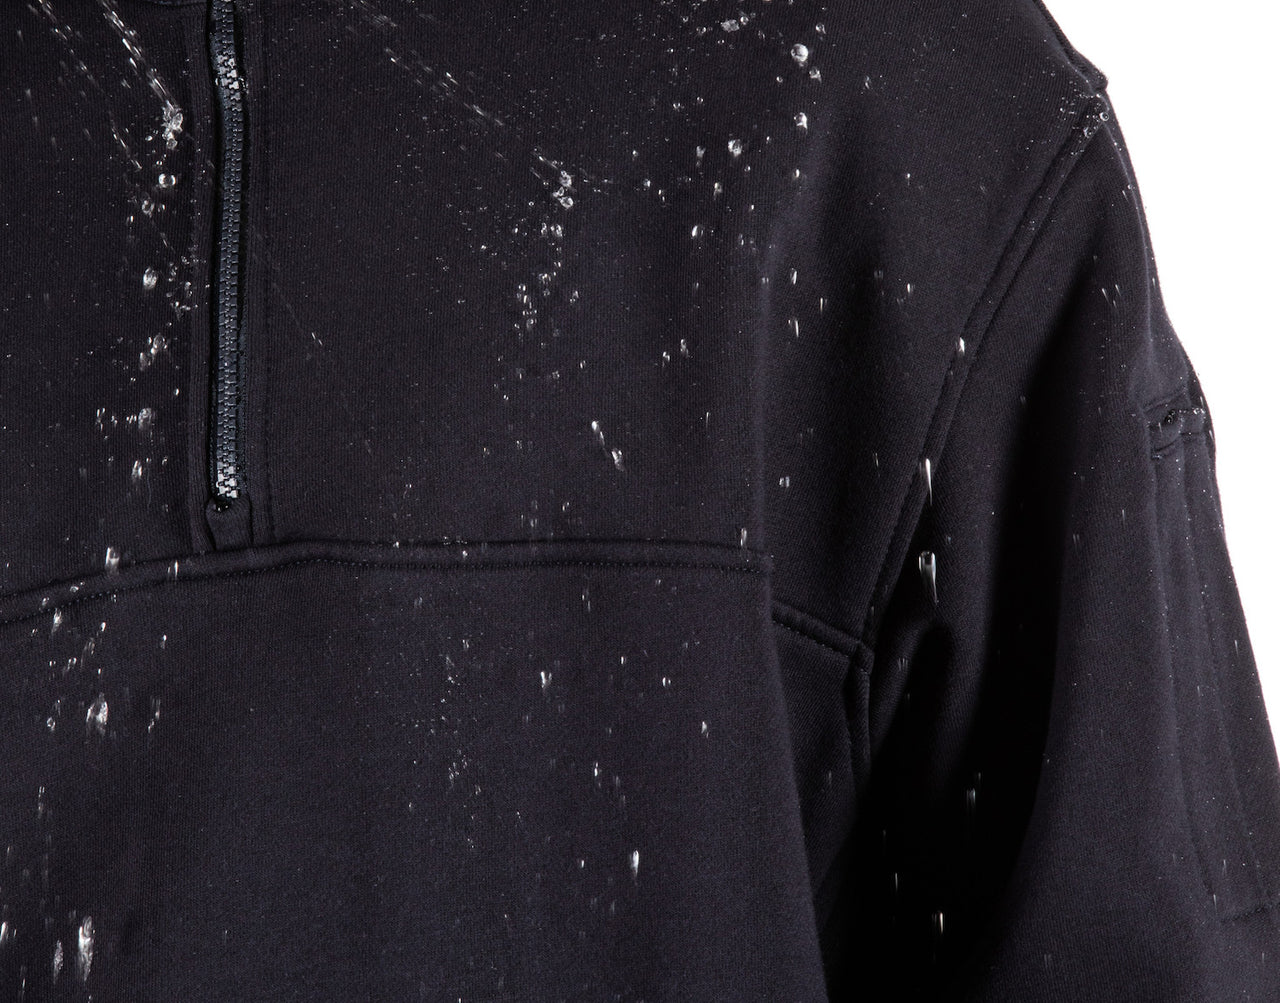 5.11 Water Repellent Job Shirt (72363) | The Fire Center | The Fire Store | Store | Fuego Fire Center | Firefighter Gear | Designed to provide superior precipitation and liquid protection while remaining breathable and lightweight, the Water Repellant Job Shirt from 5.11® is crafted from genuine Storm Cotton®, giving you an ideal blend of comfort and all-weather performance